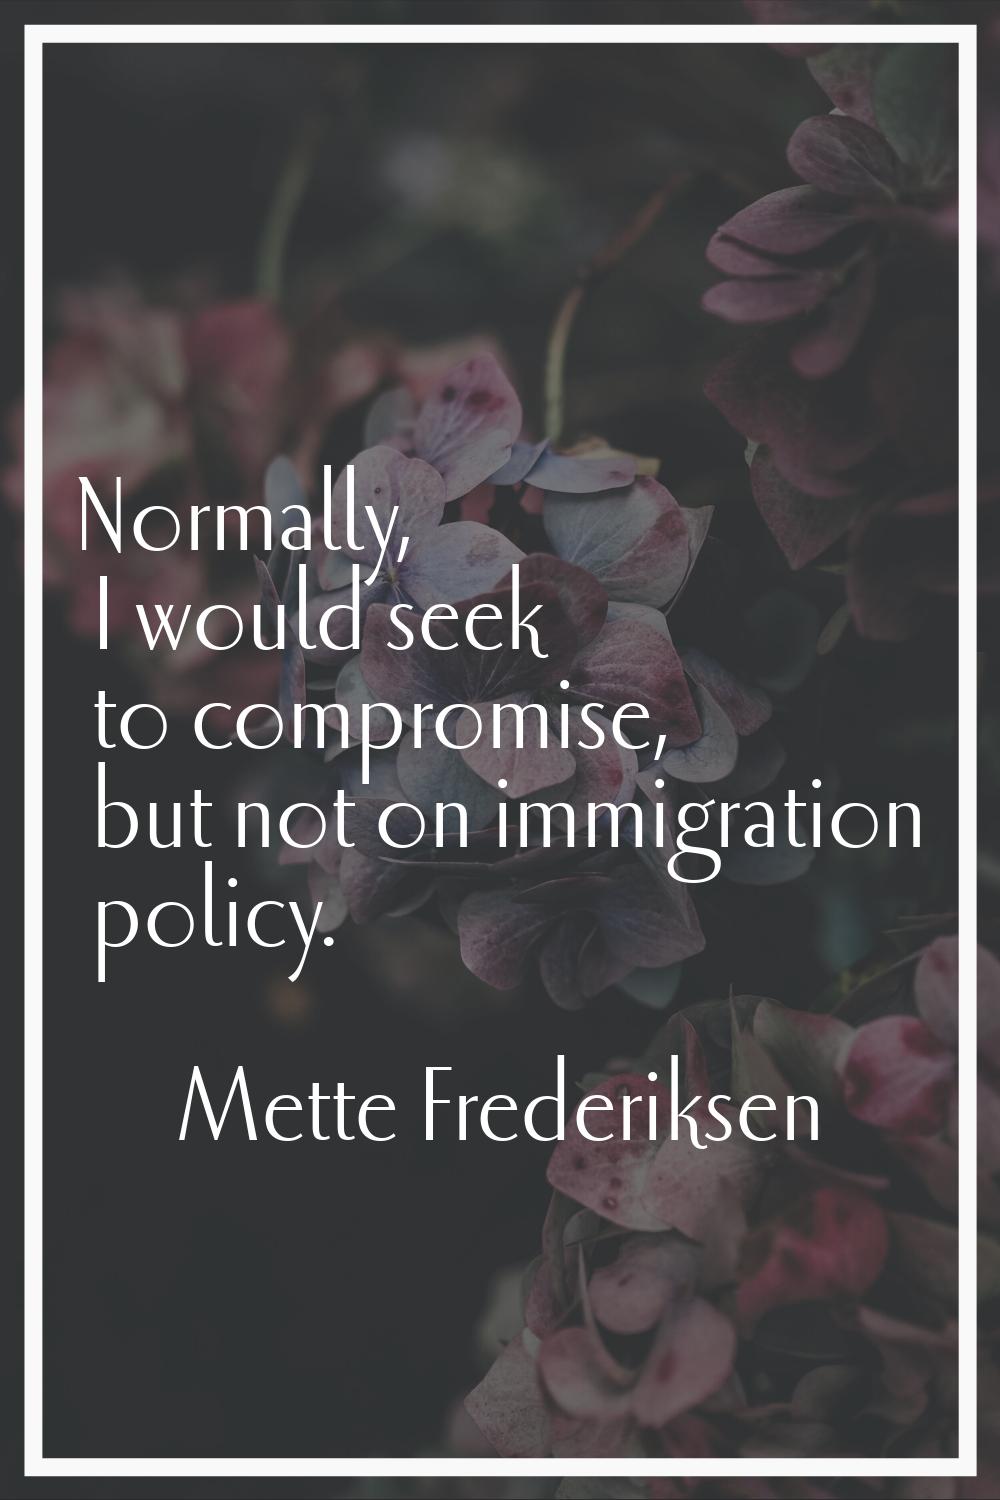 Normally, I would seek to compromise, but not on immigration policy.